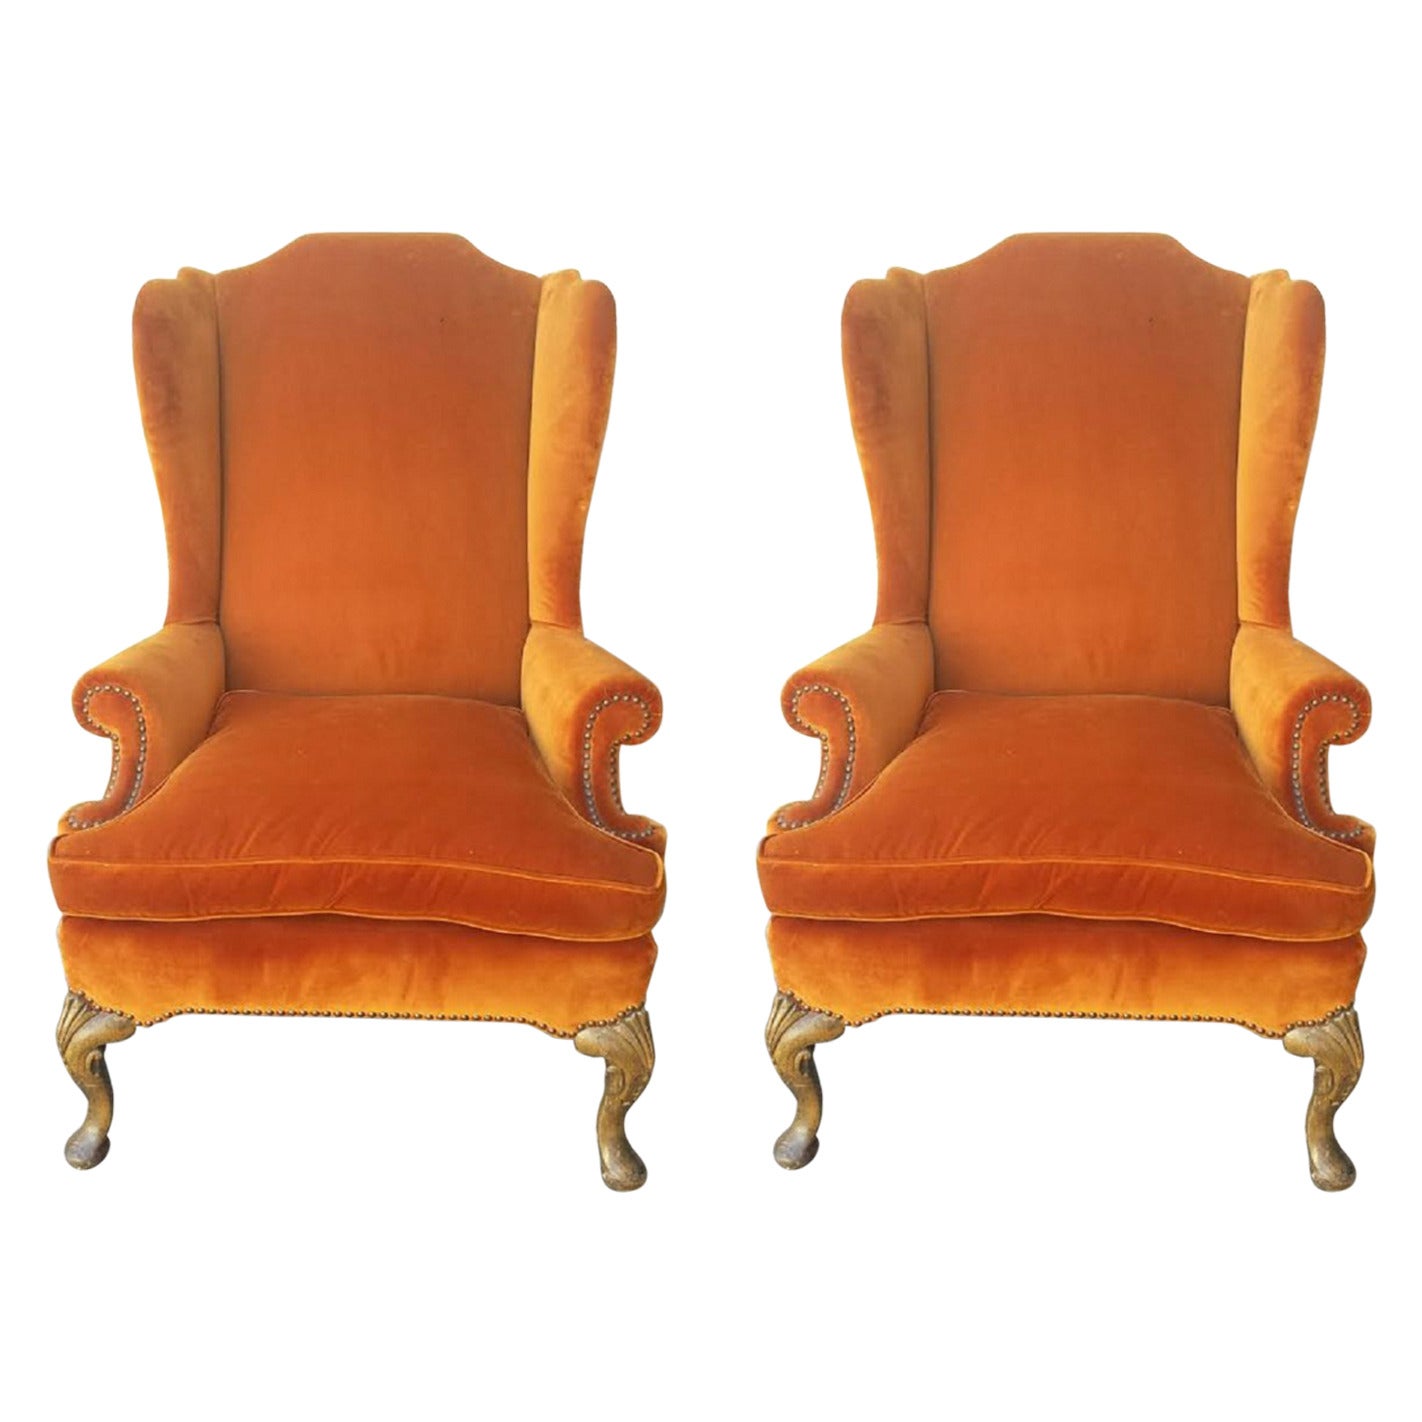 Wingback Chairs, Pair of French Louis XV Style Wingback Chairs